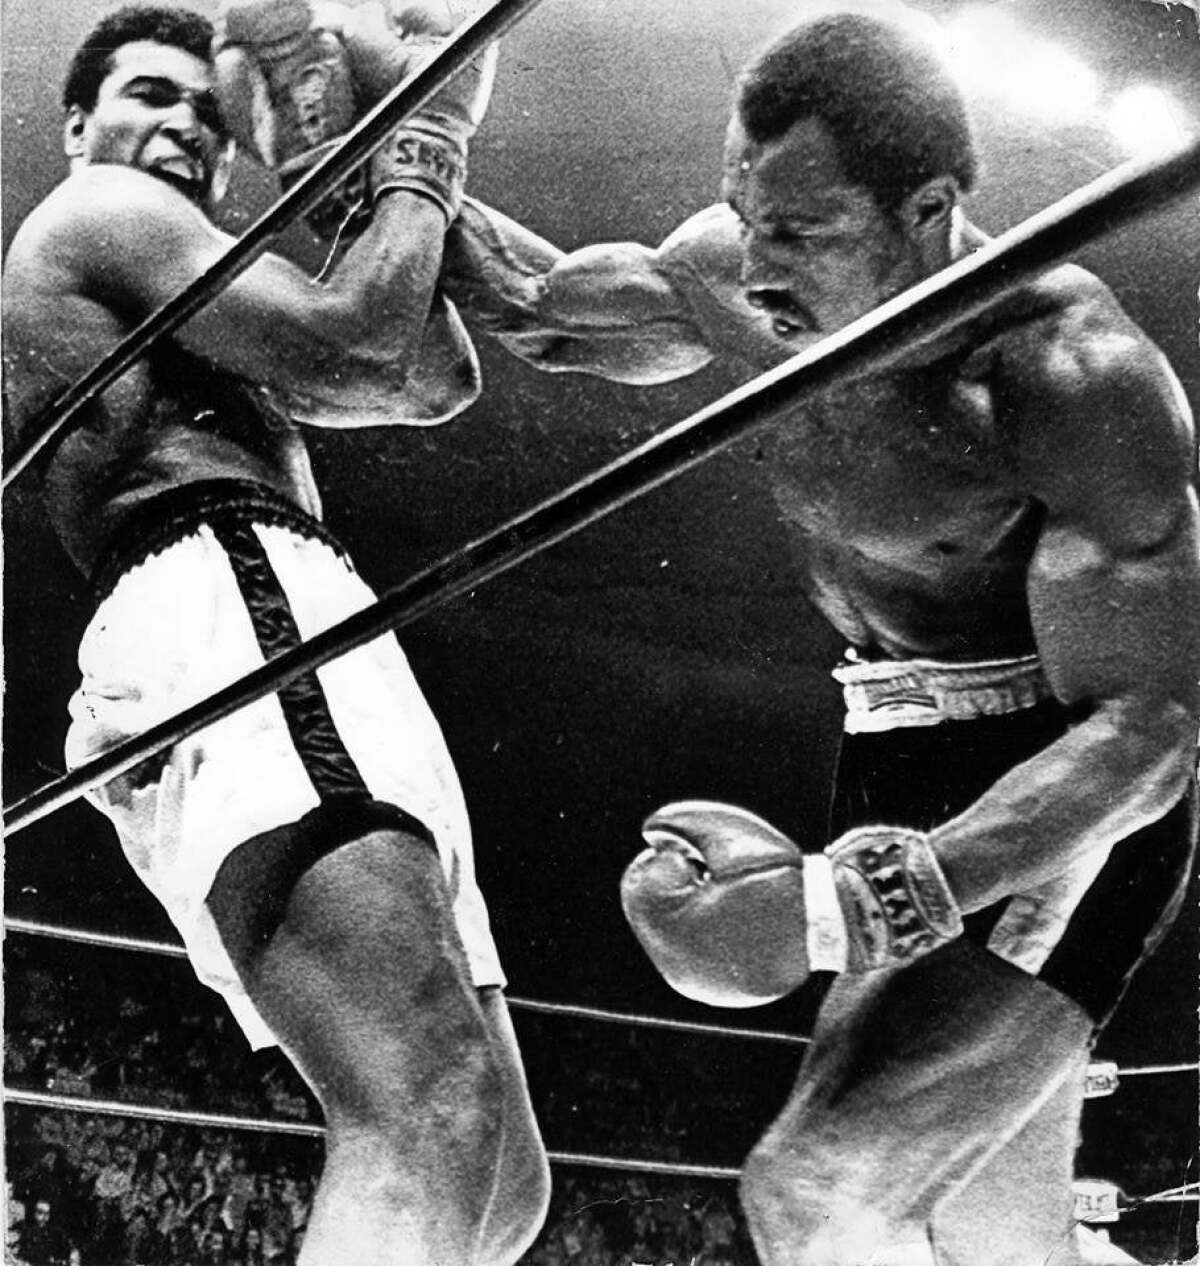 San Diego’s Ken Norton pummels Muhammad Ali at the Sports Arena on March 31, 1973.